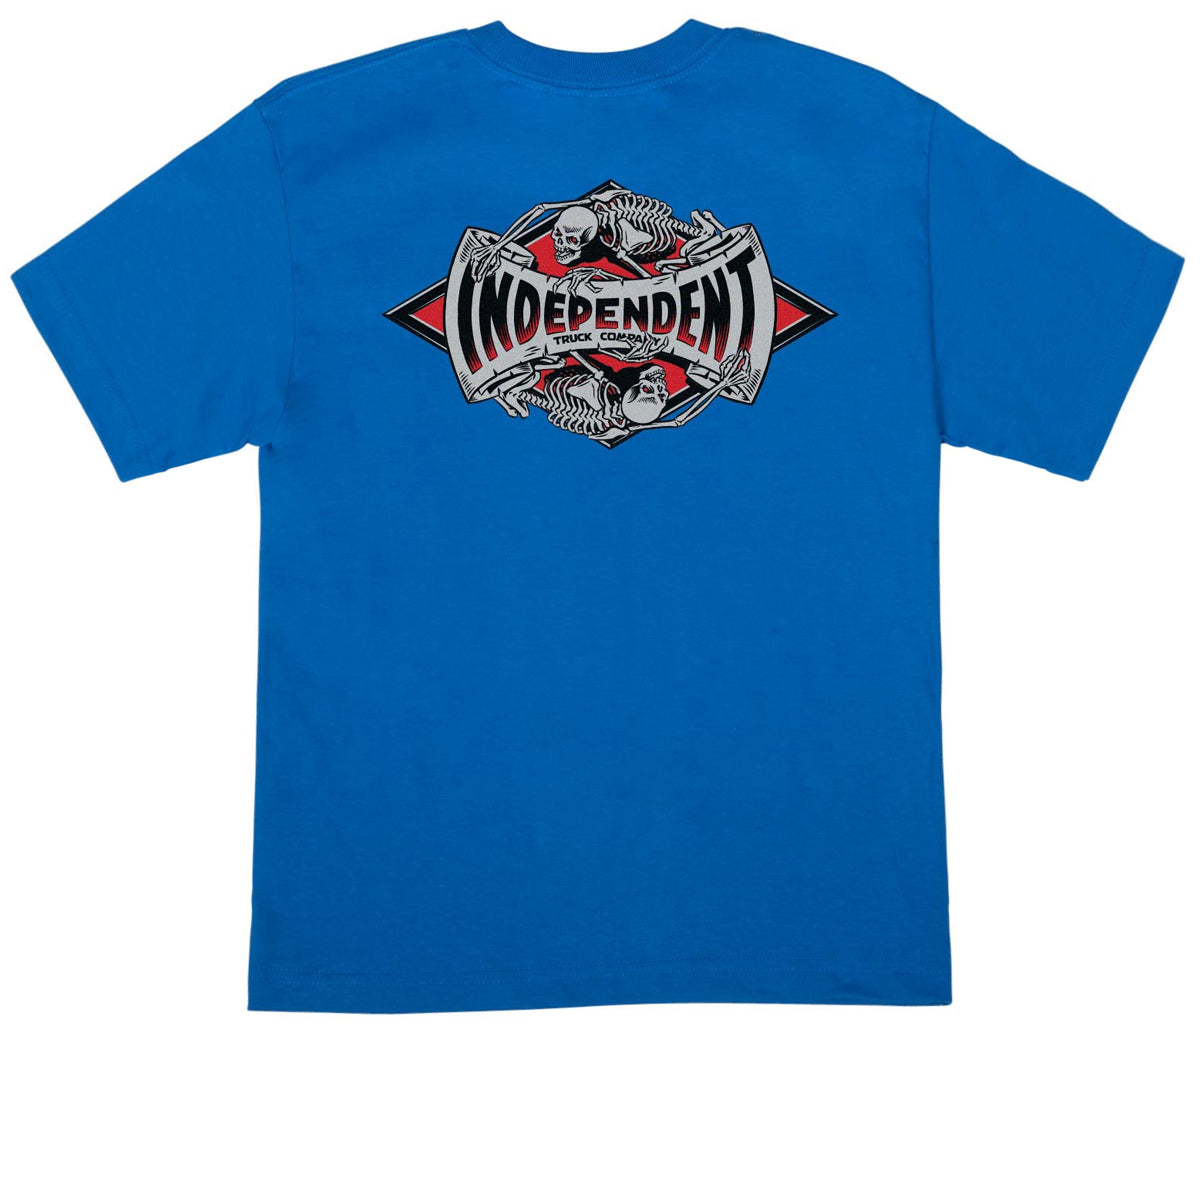 Independent Youth Legacy T-Shirt - Royal image 1